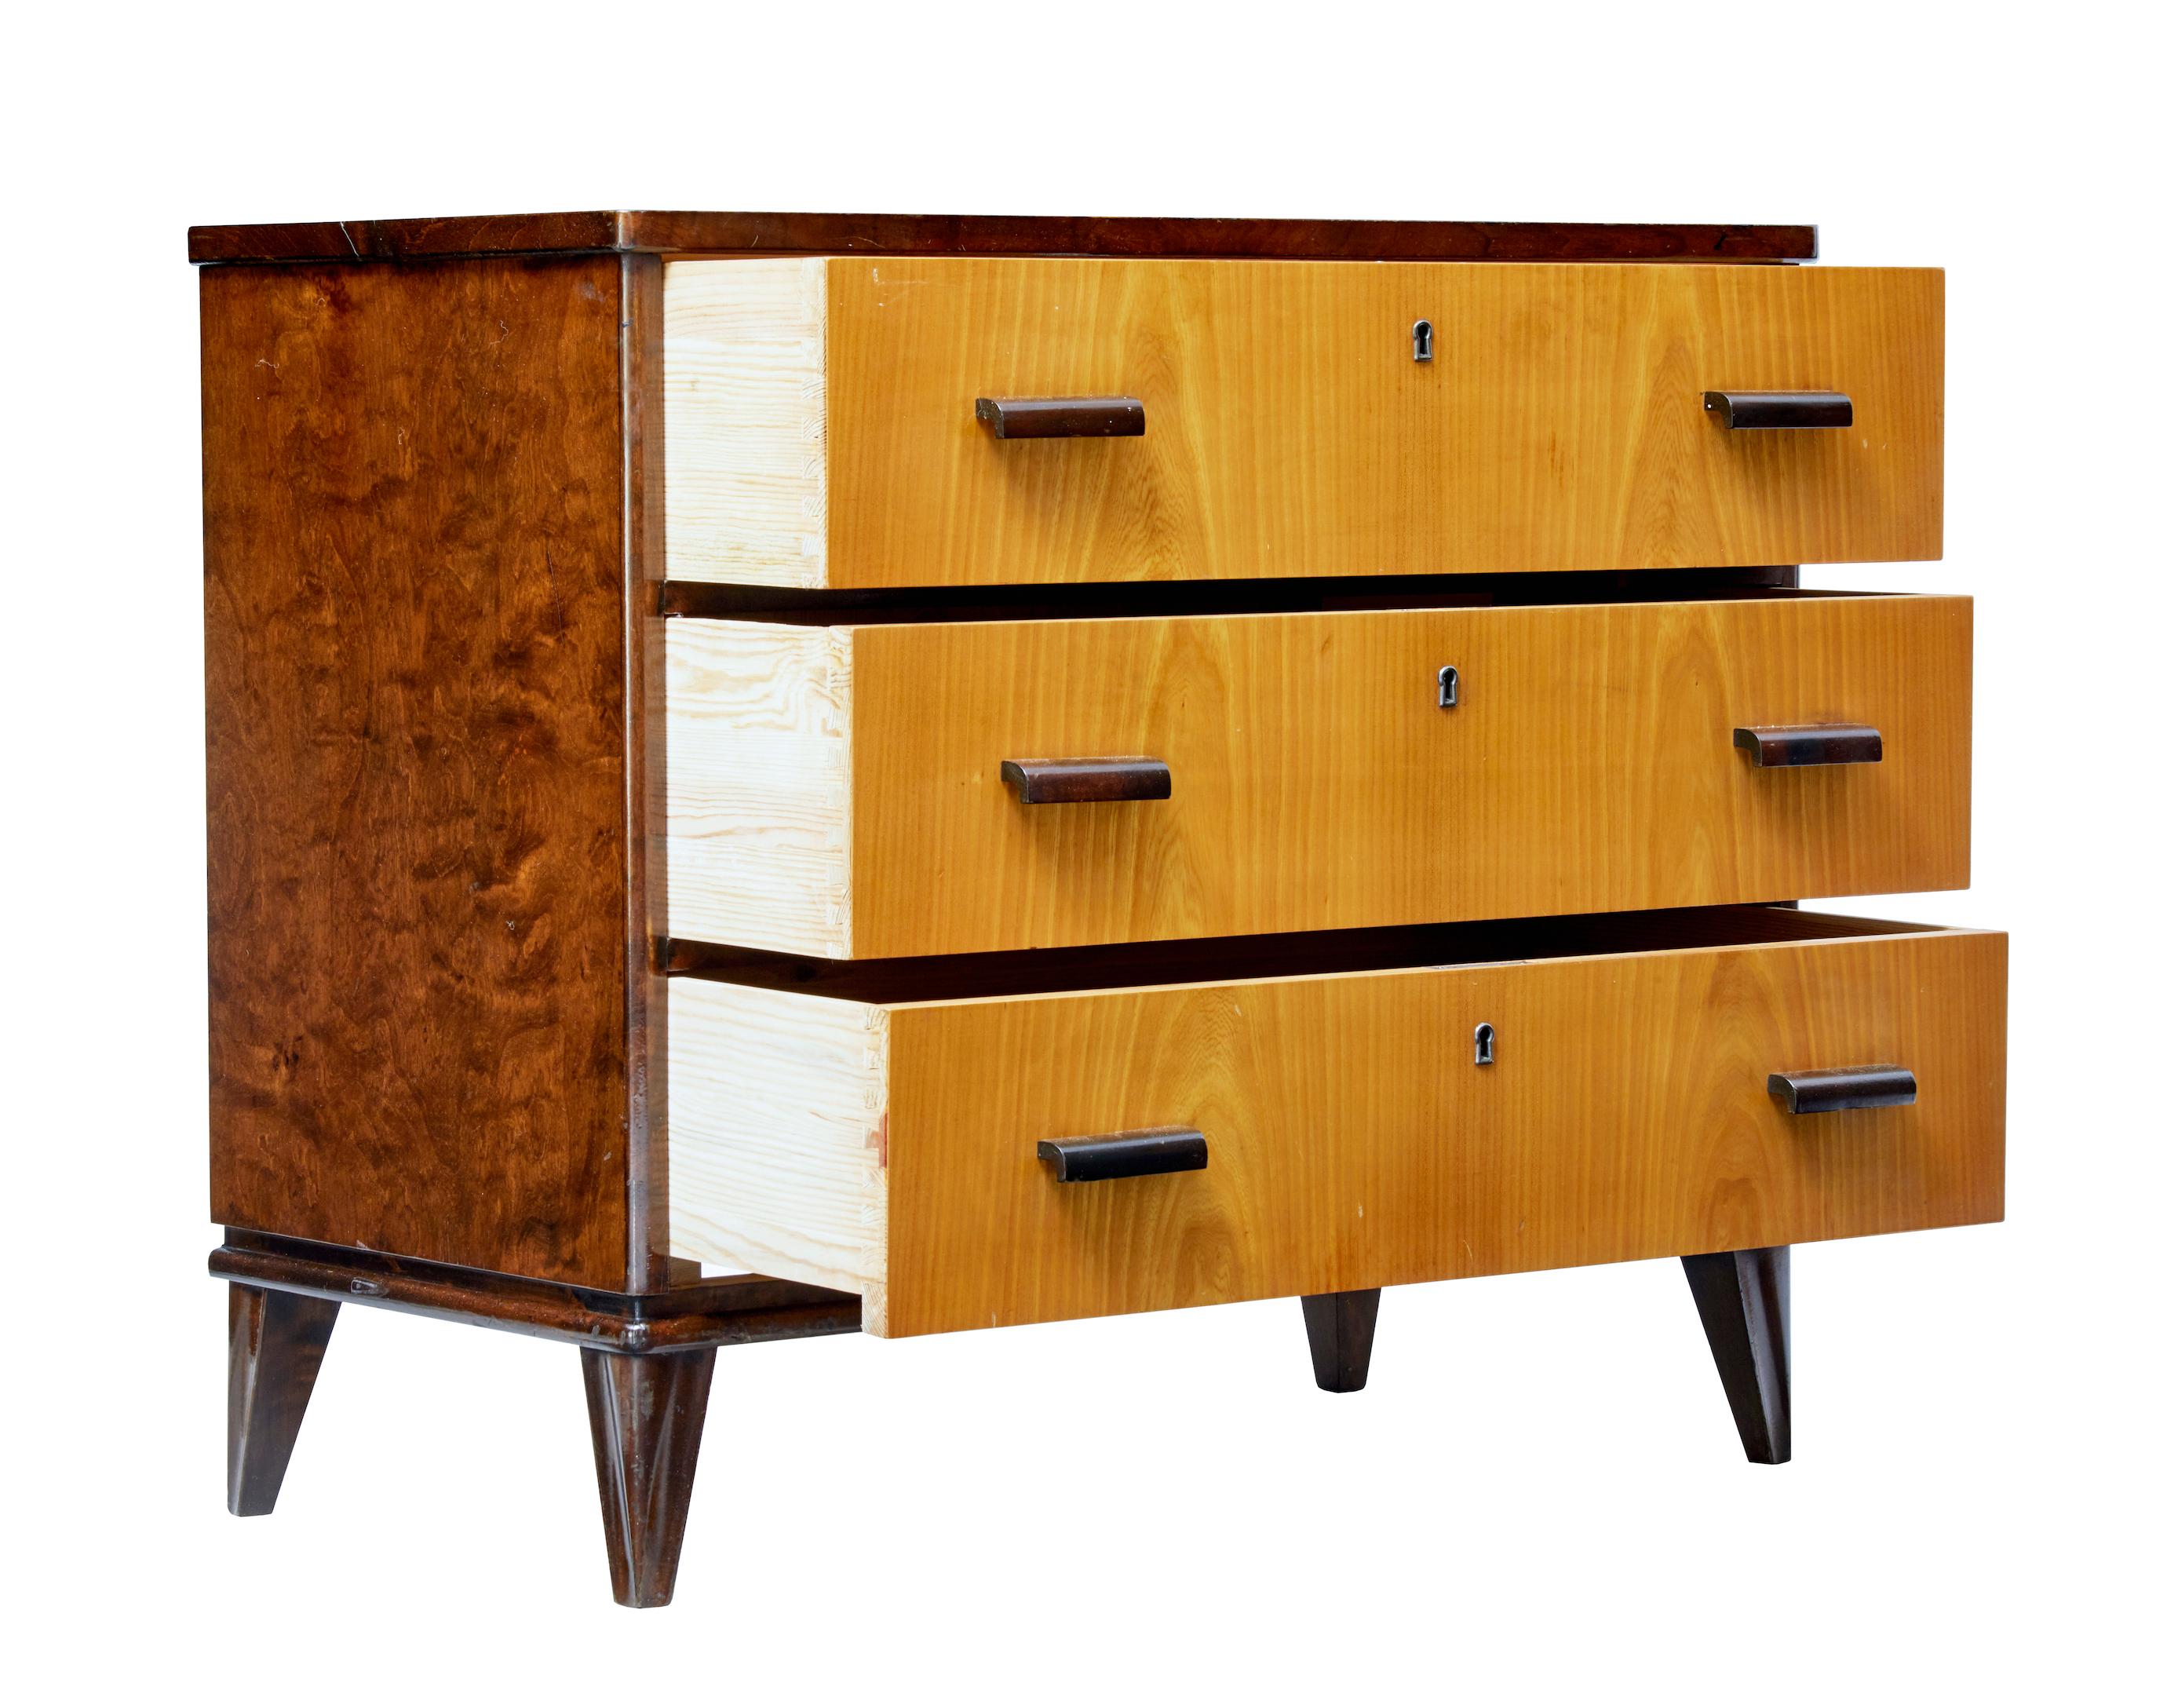 Good quality late art deco chest of drawers, circa 1950.

Three drawers with golden elm veneer which provides a striking contrast to the dark stained birch frame. Shaped wooden handles to the drawer fronts.

Burr birch sides and top surface.